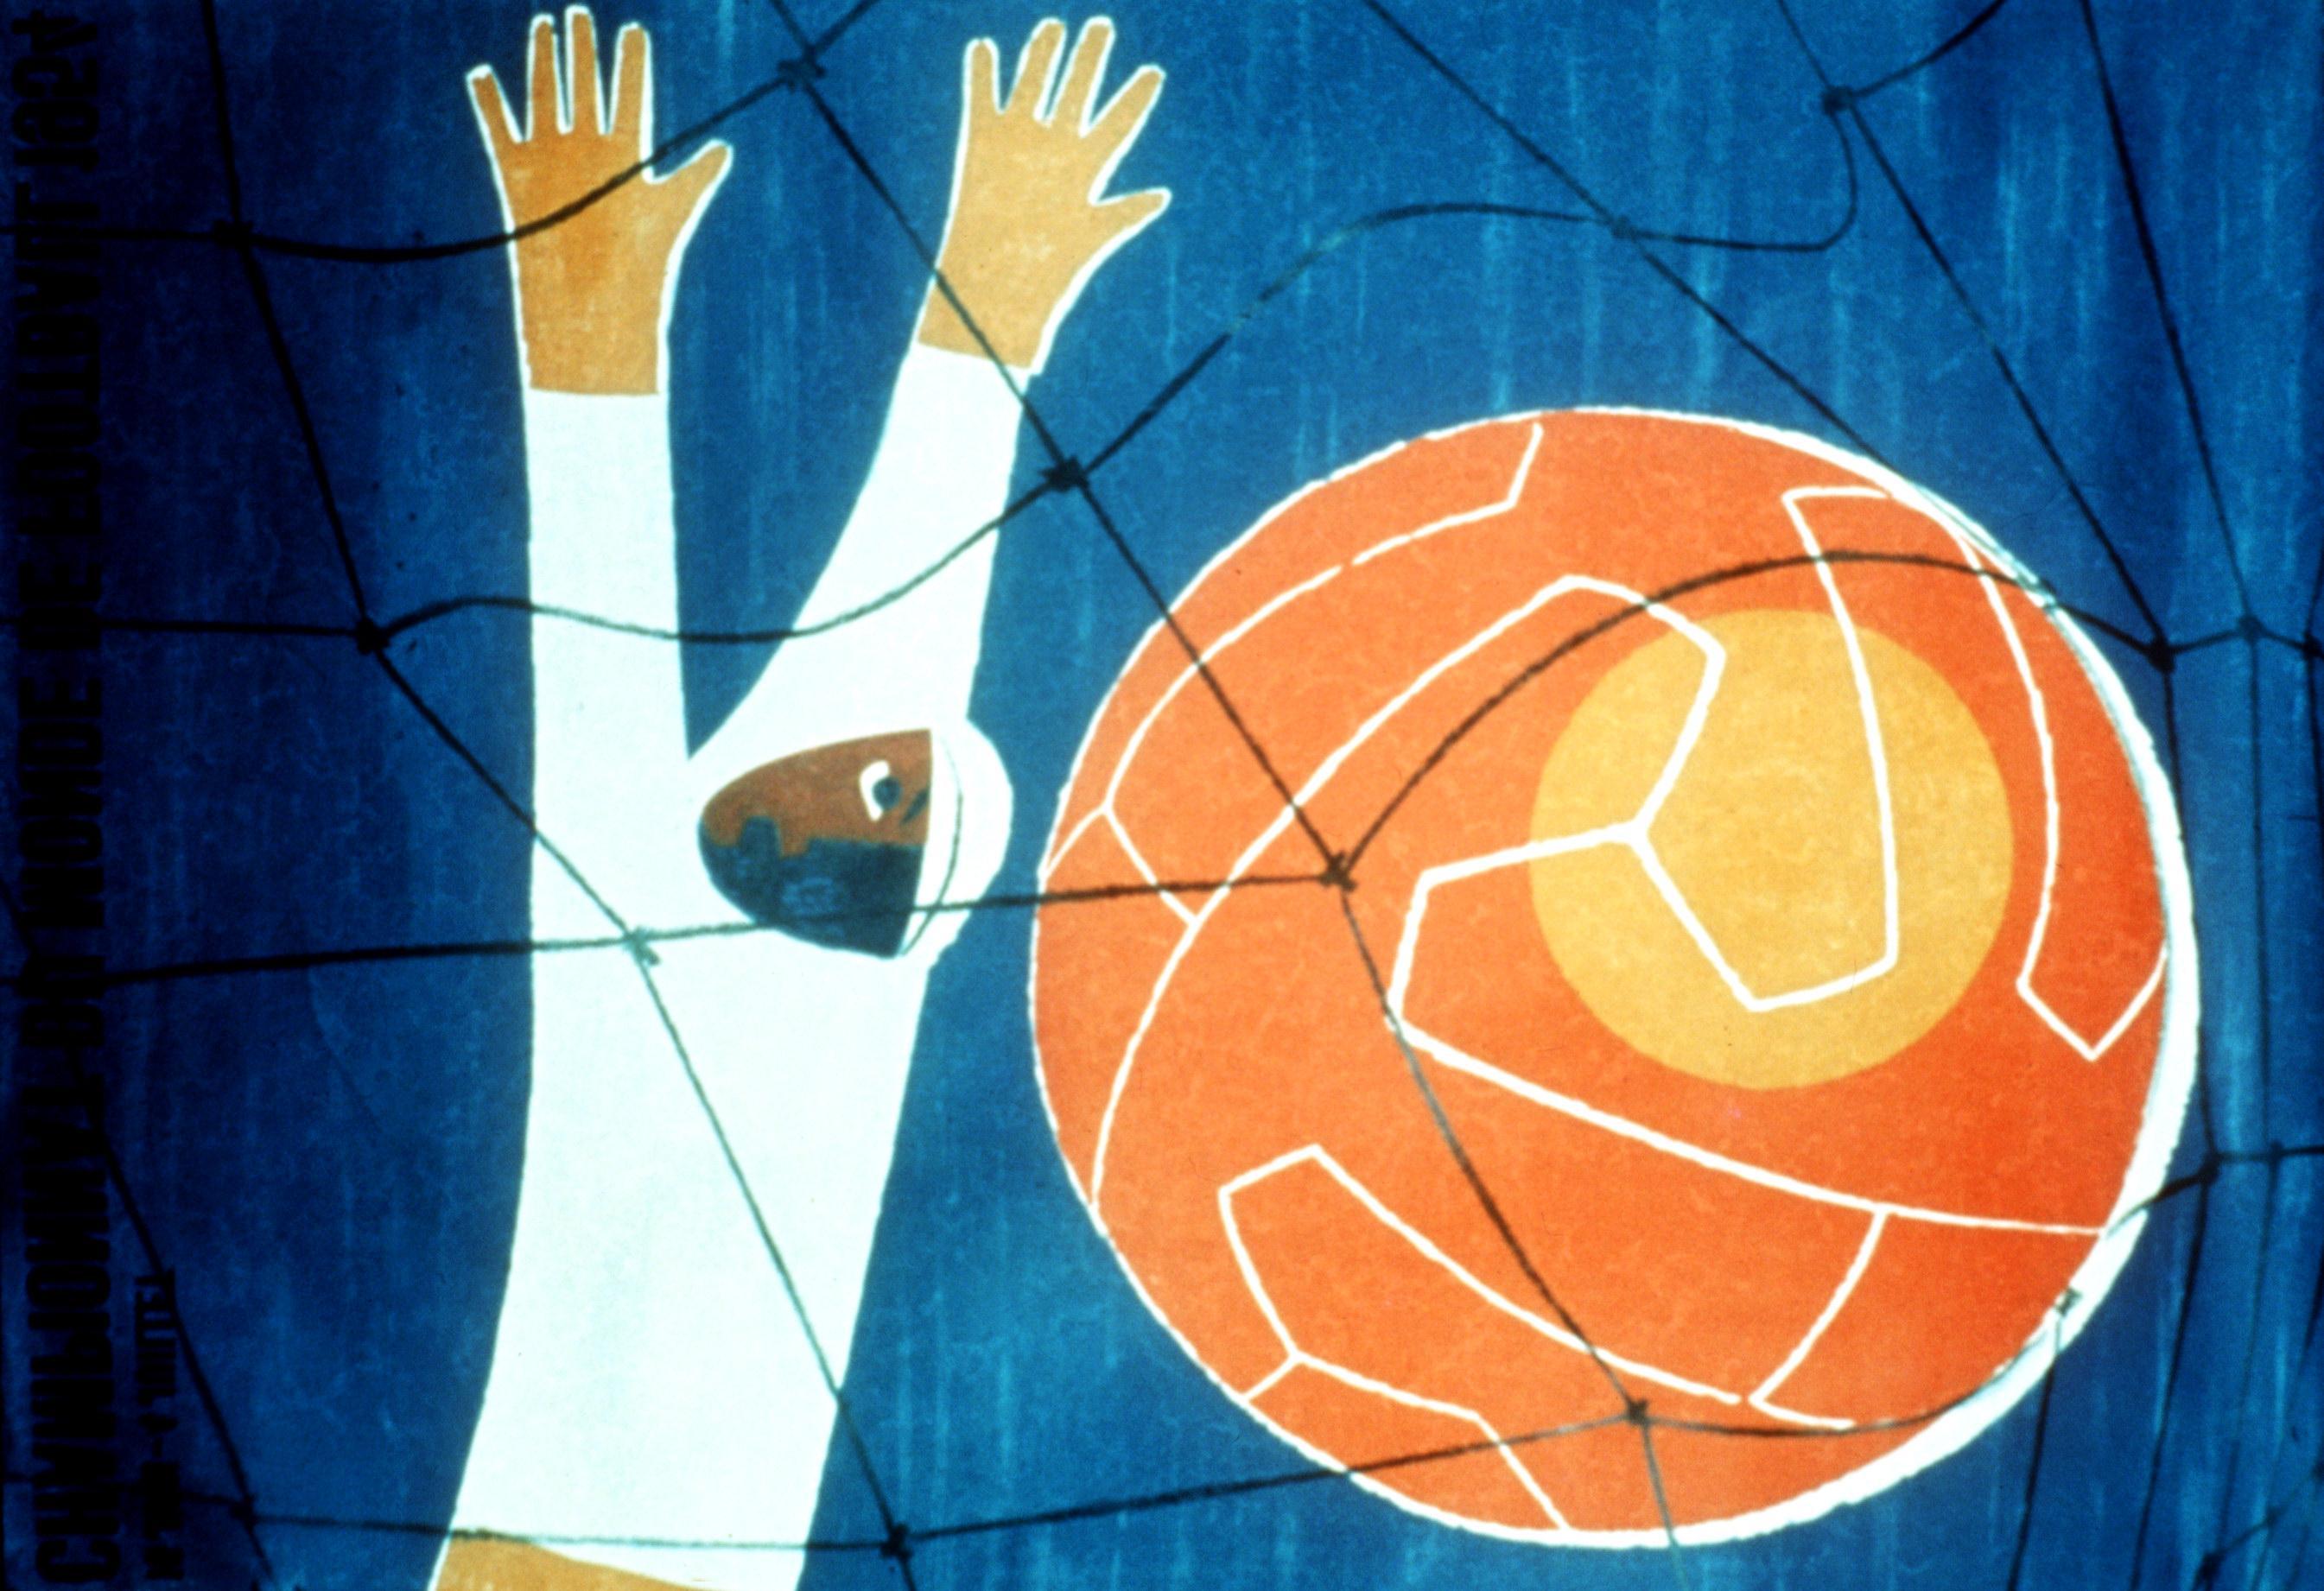 The 1954 World Cup poster